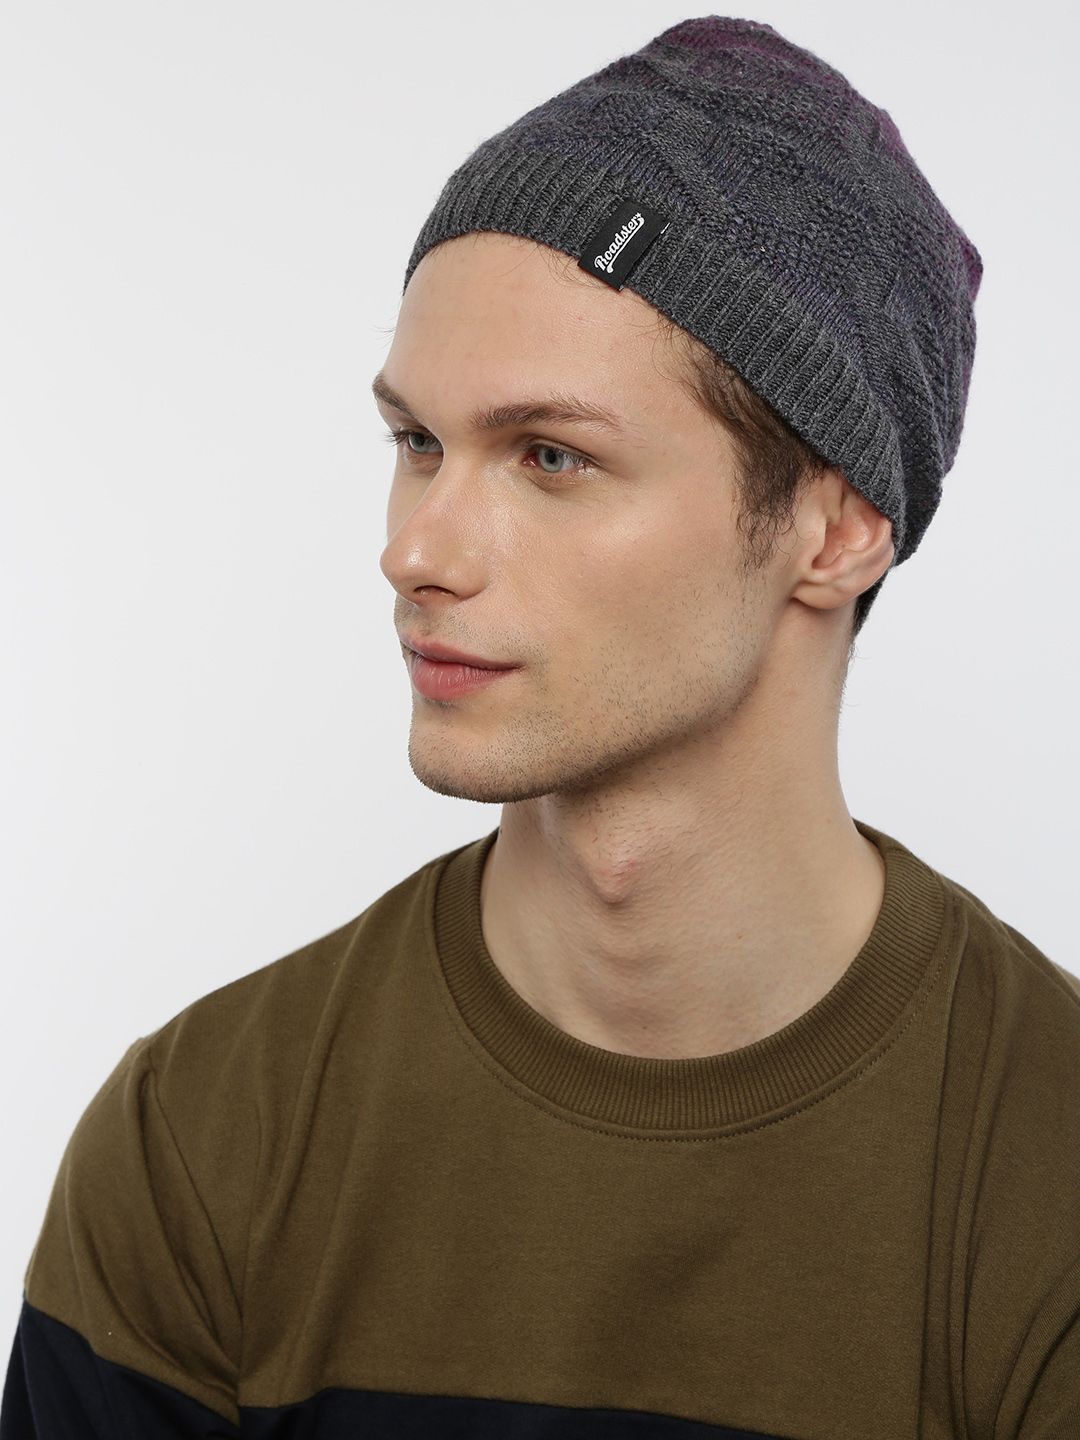 The Roadster Lifestyle Co Unisex Purple & Grey Self Design Beanie Price in India